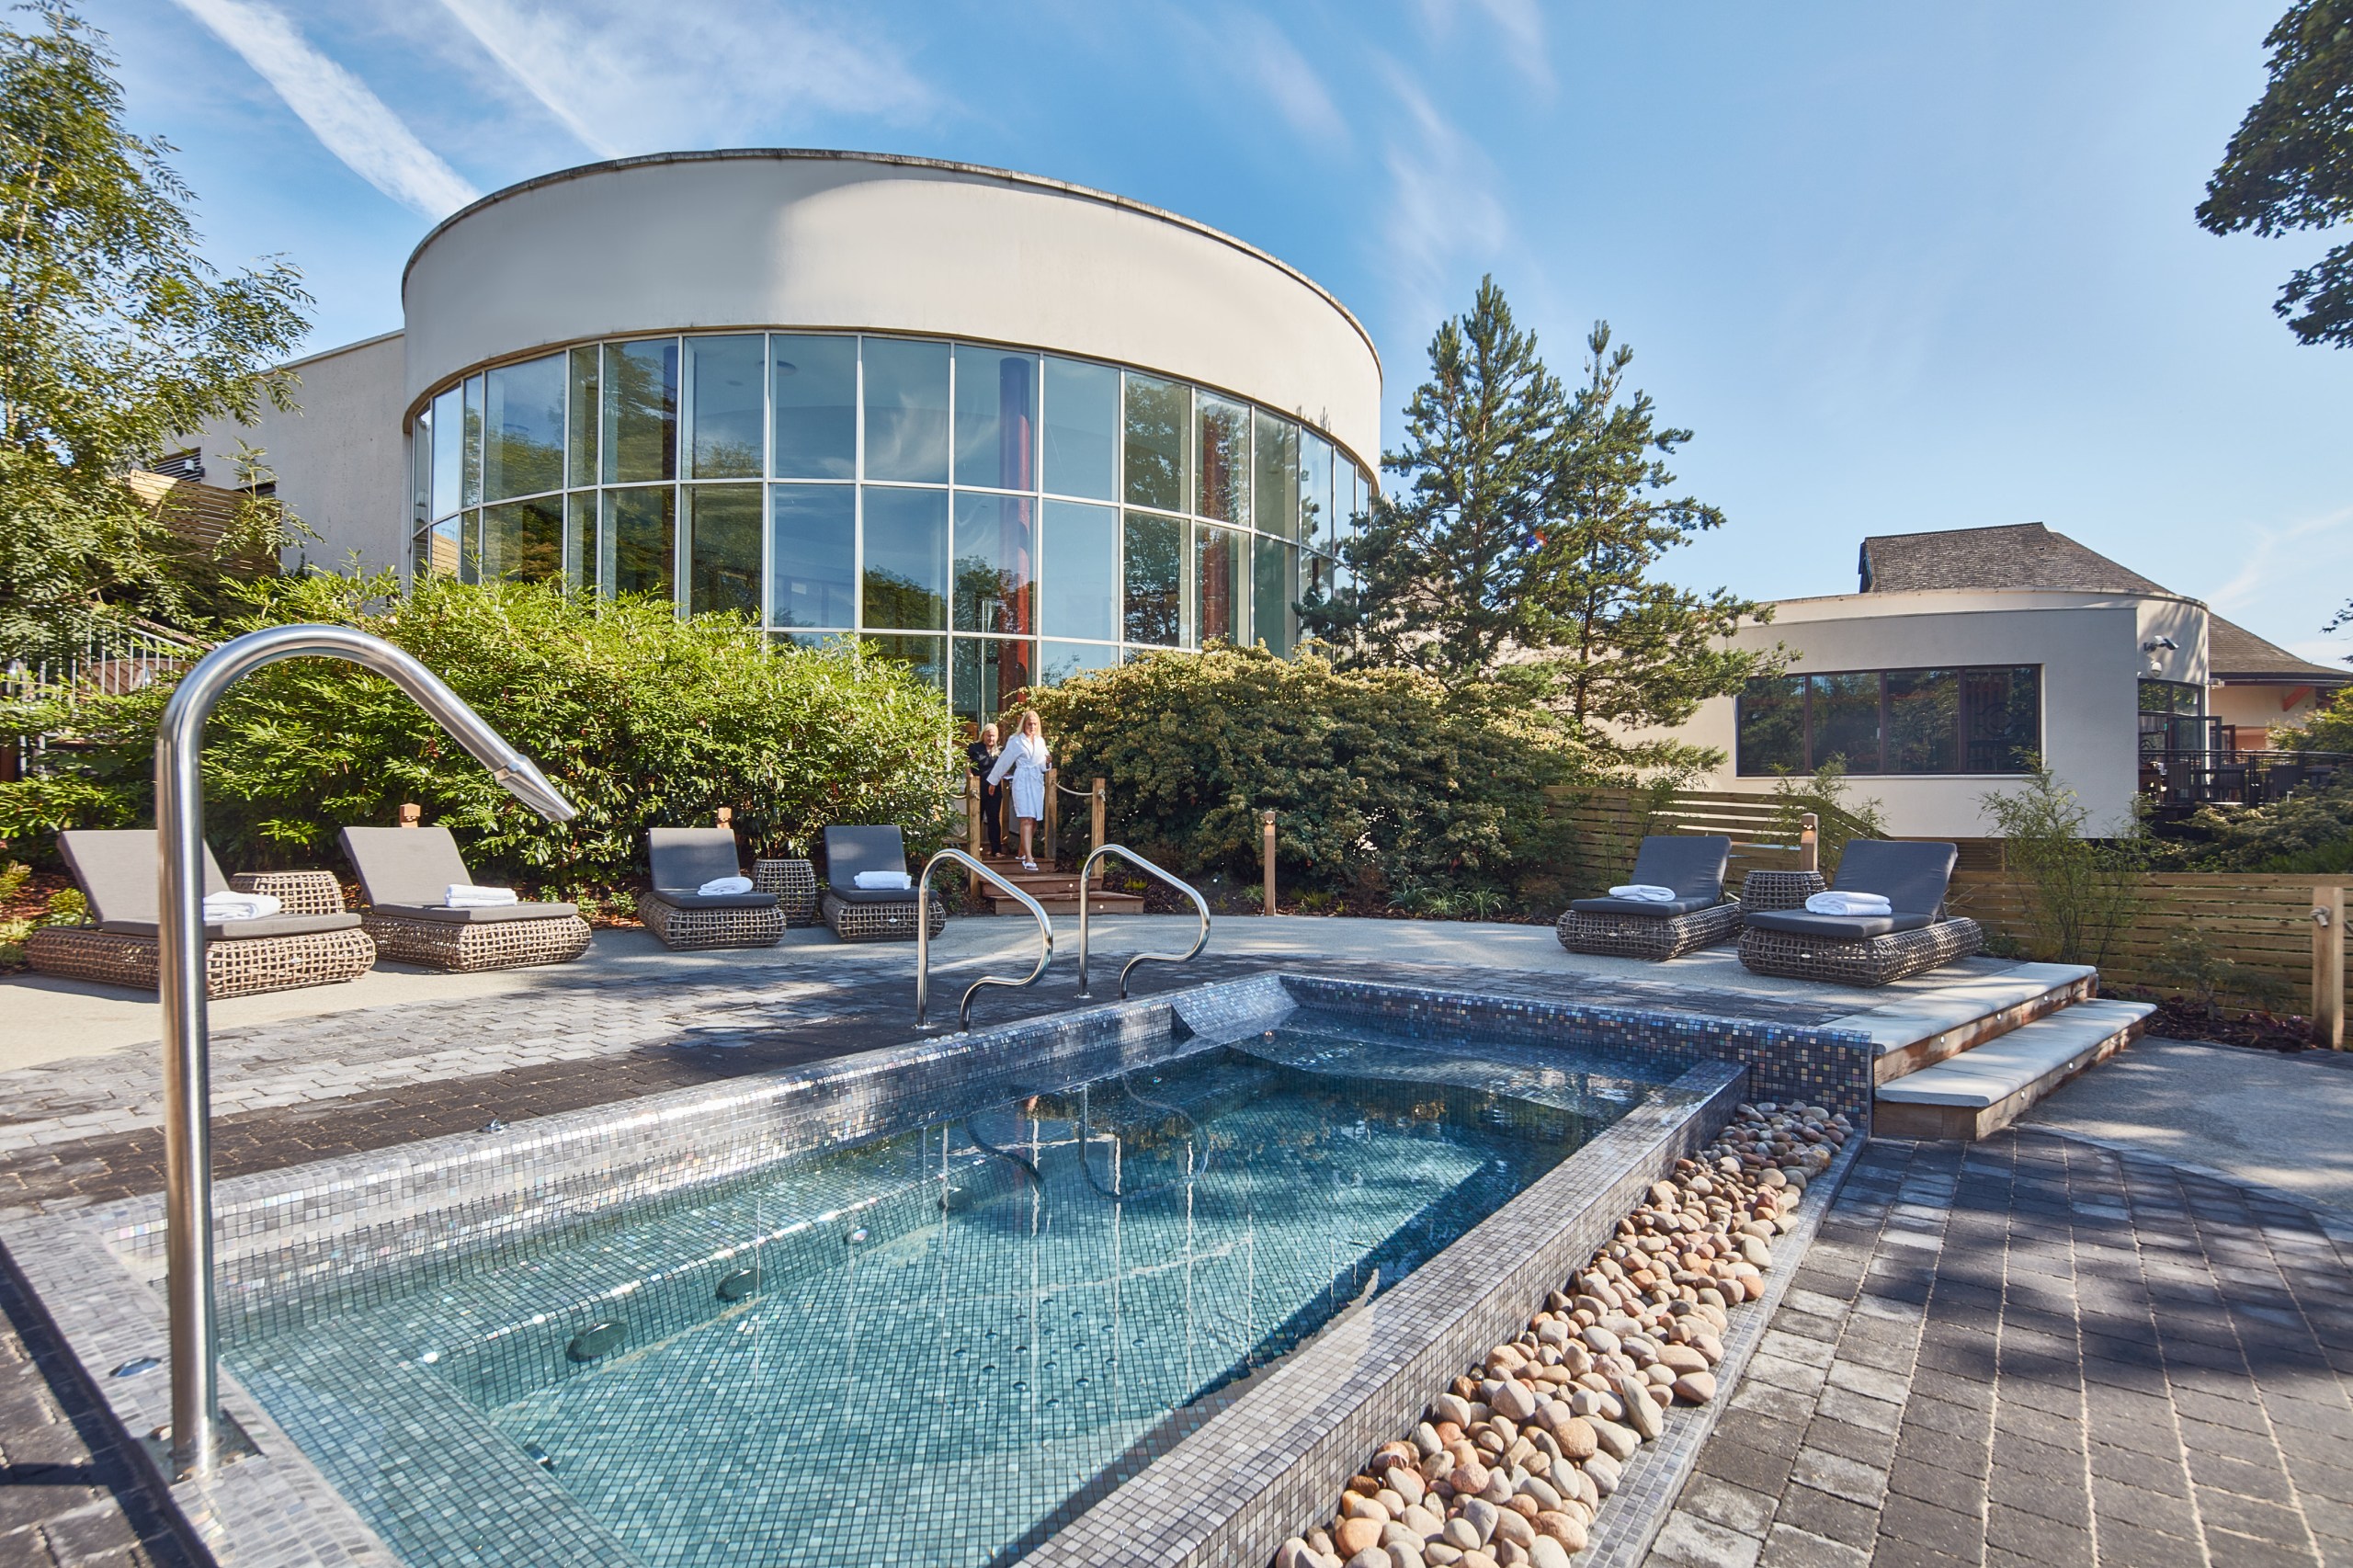 Serenity Spa includes pools, saunas, steam rooms and a gym